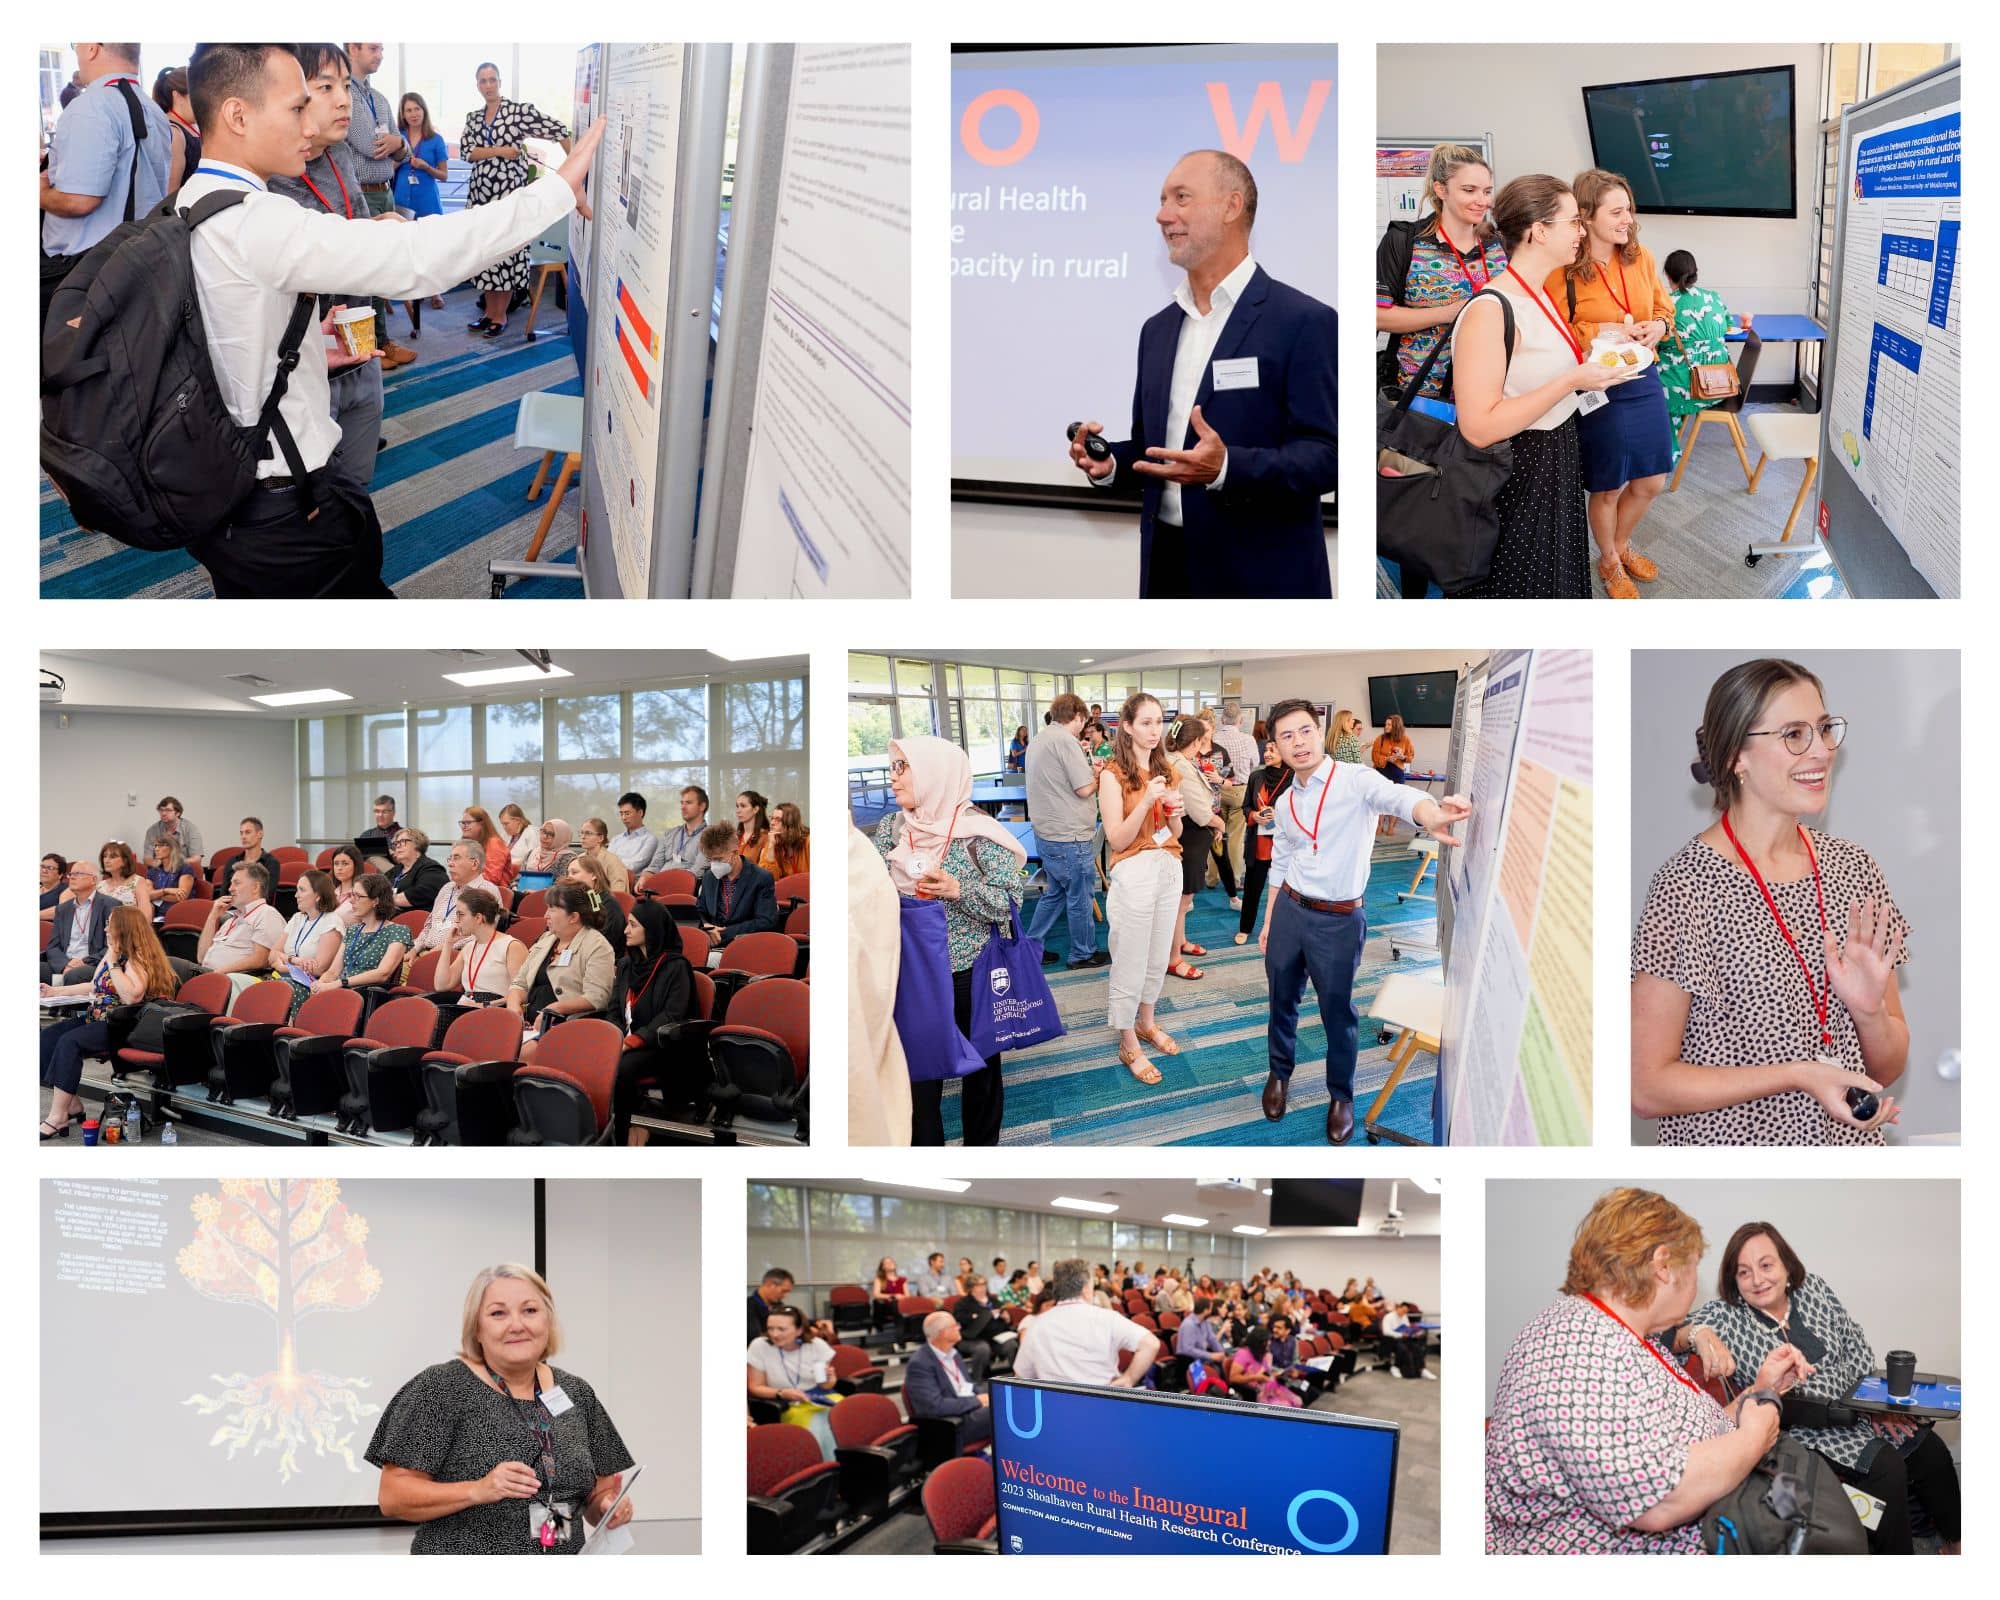 A curated collage of images from the Shoalhaven Rural Health Conference, showing speakers and the audience.